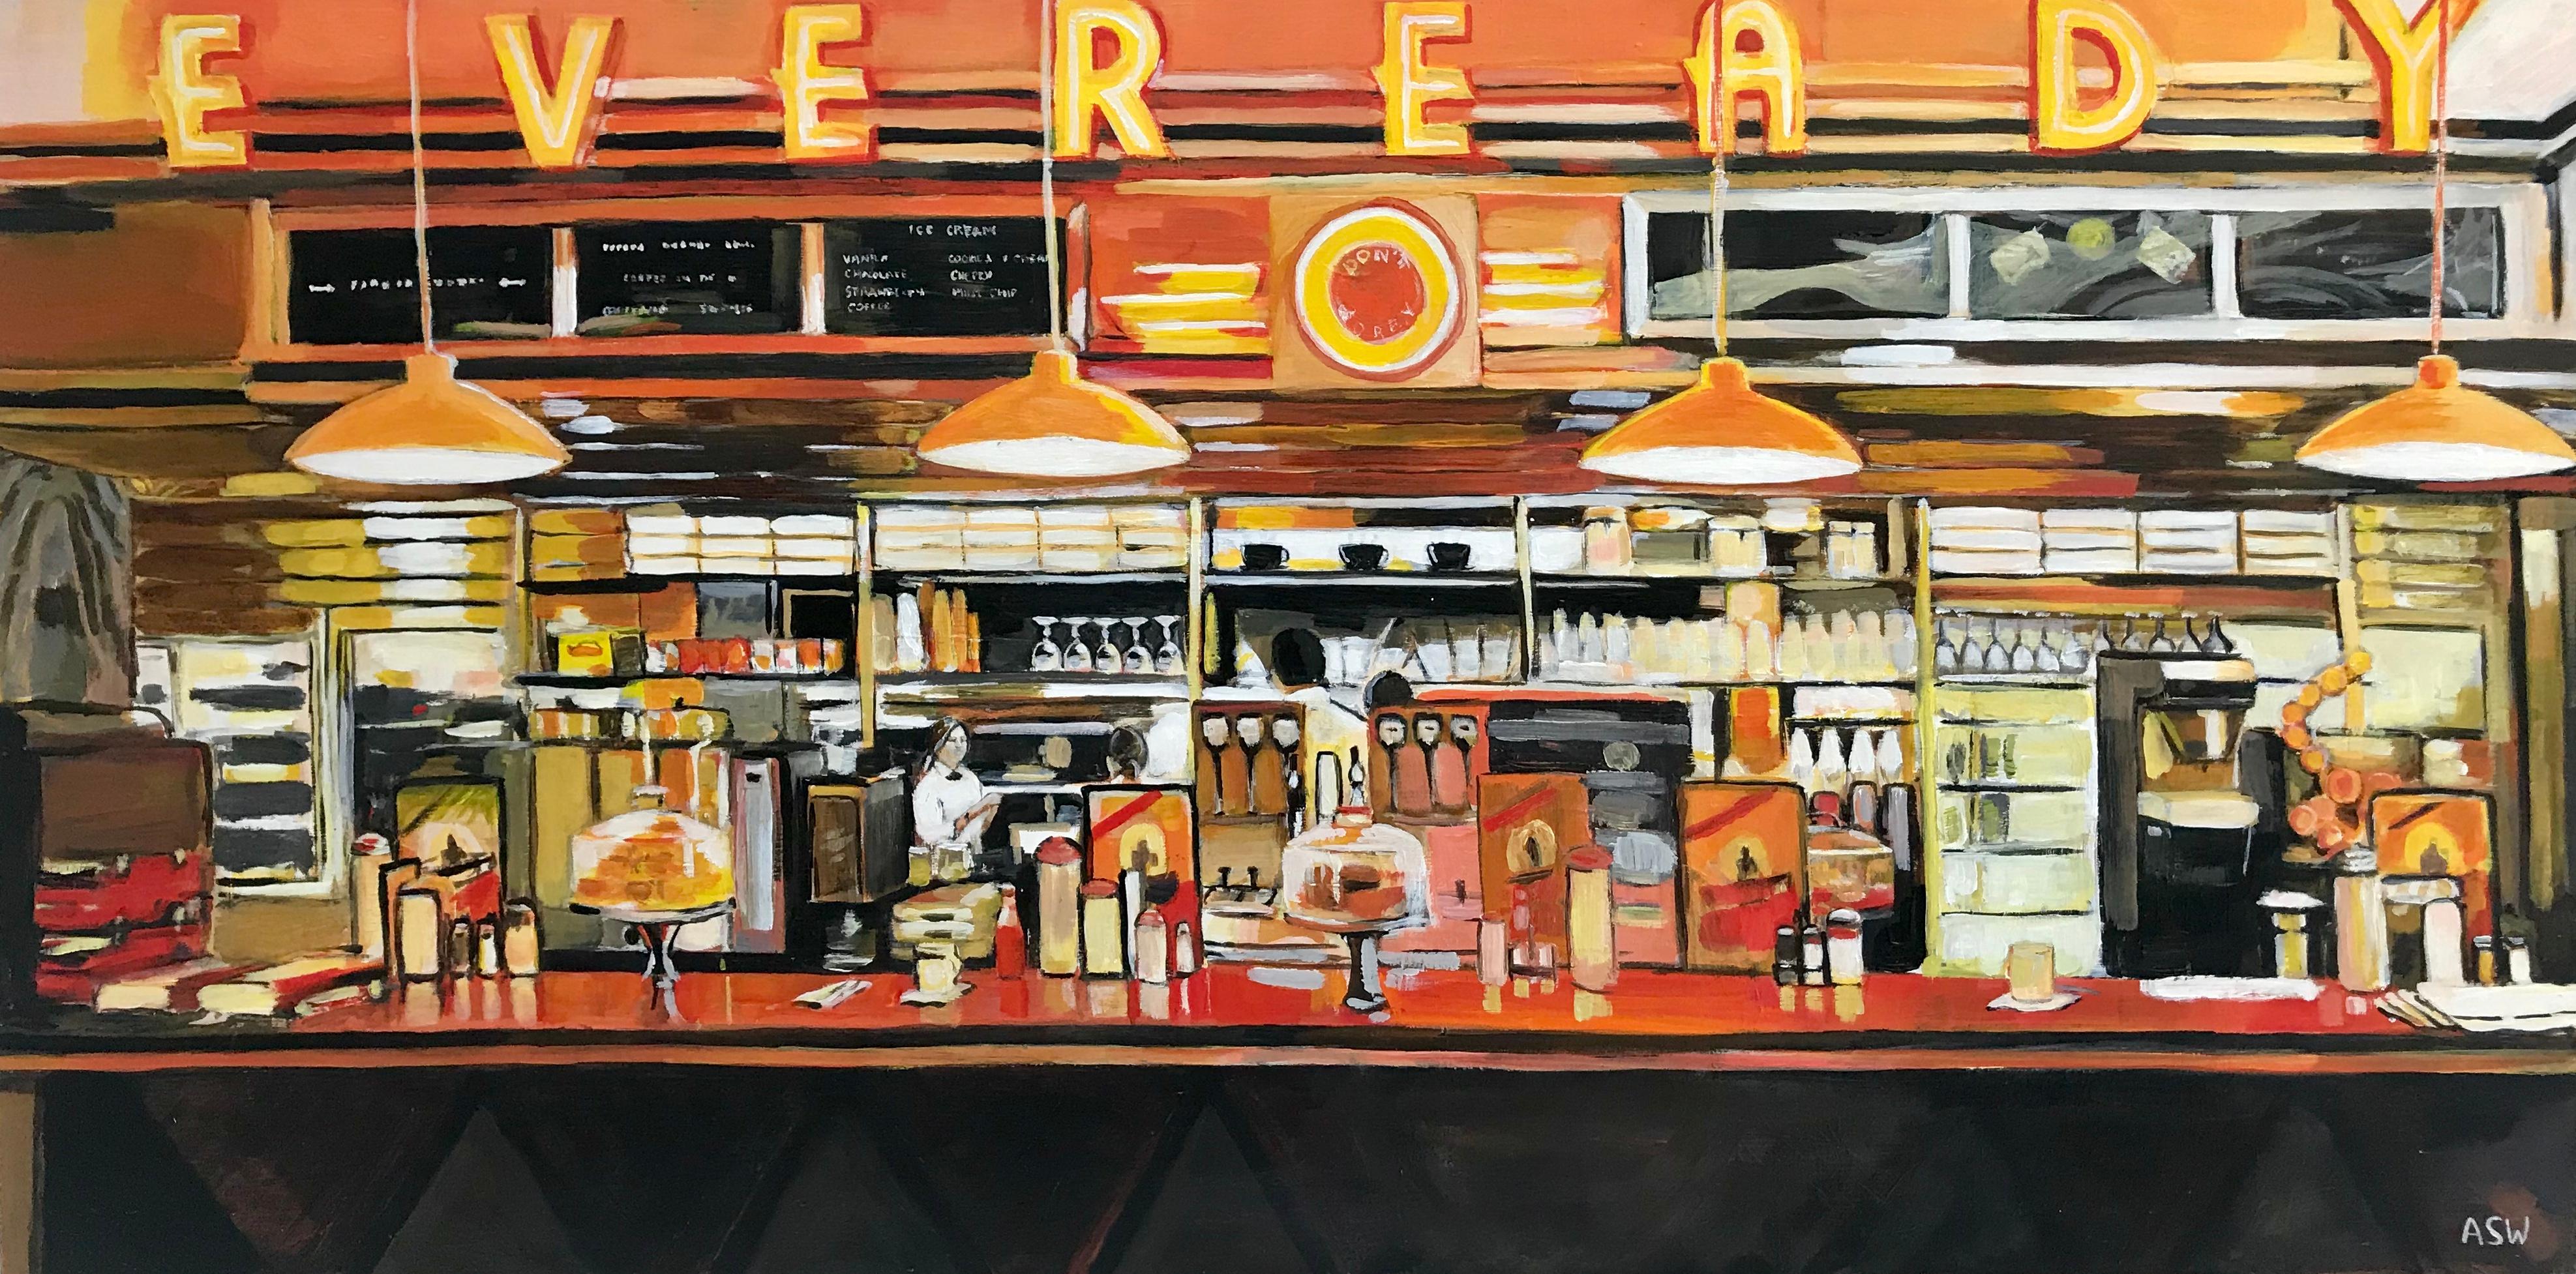 American Diner Still Life Painting by Leading British Urban Landscape Artist